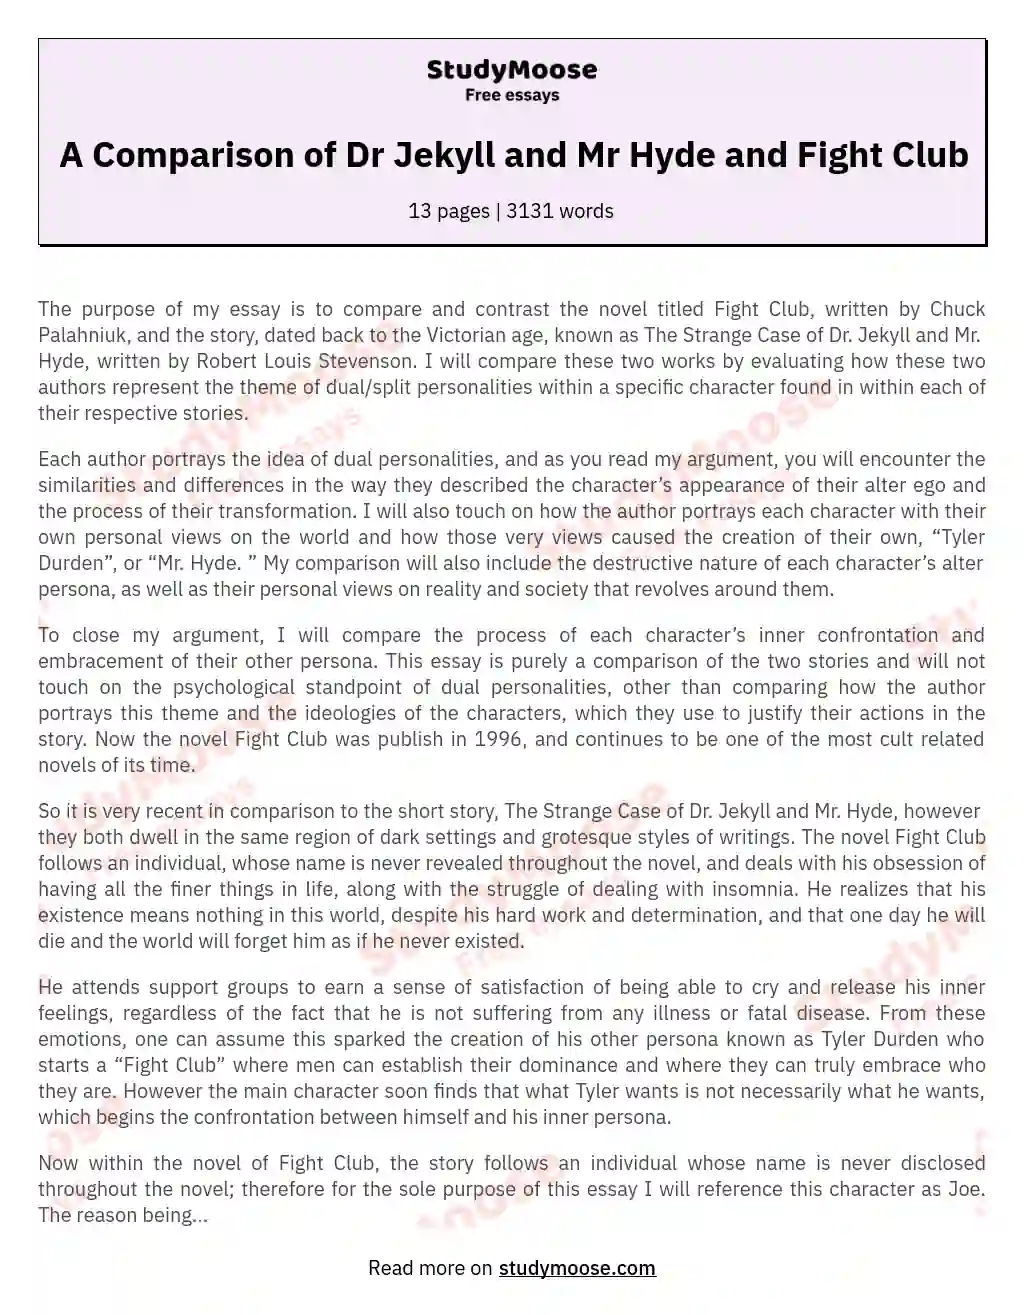 A Comparison of Dr Jekyll and Mr Hyde and Fight Club